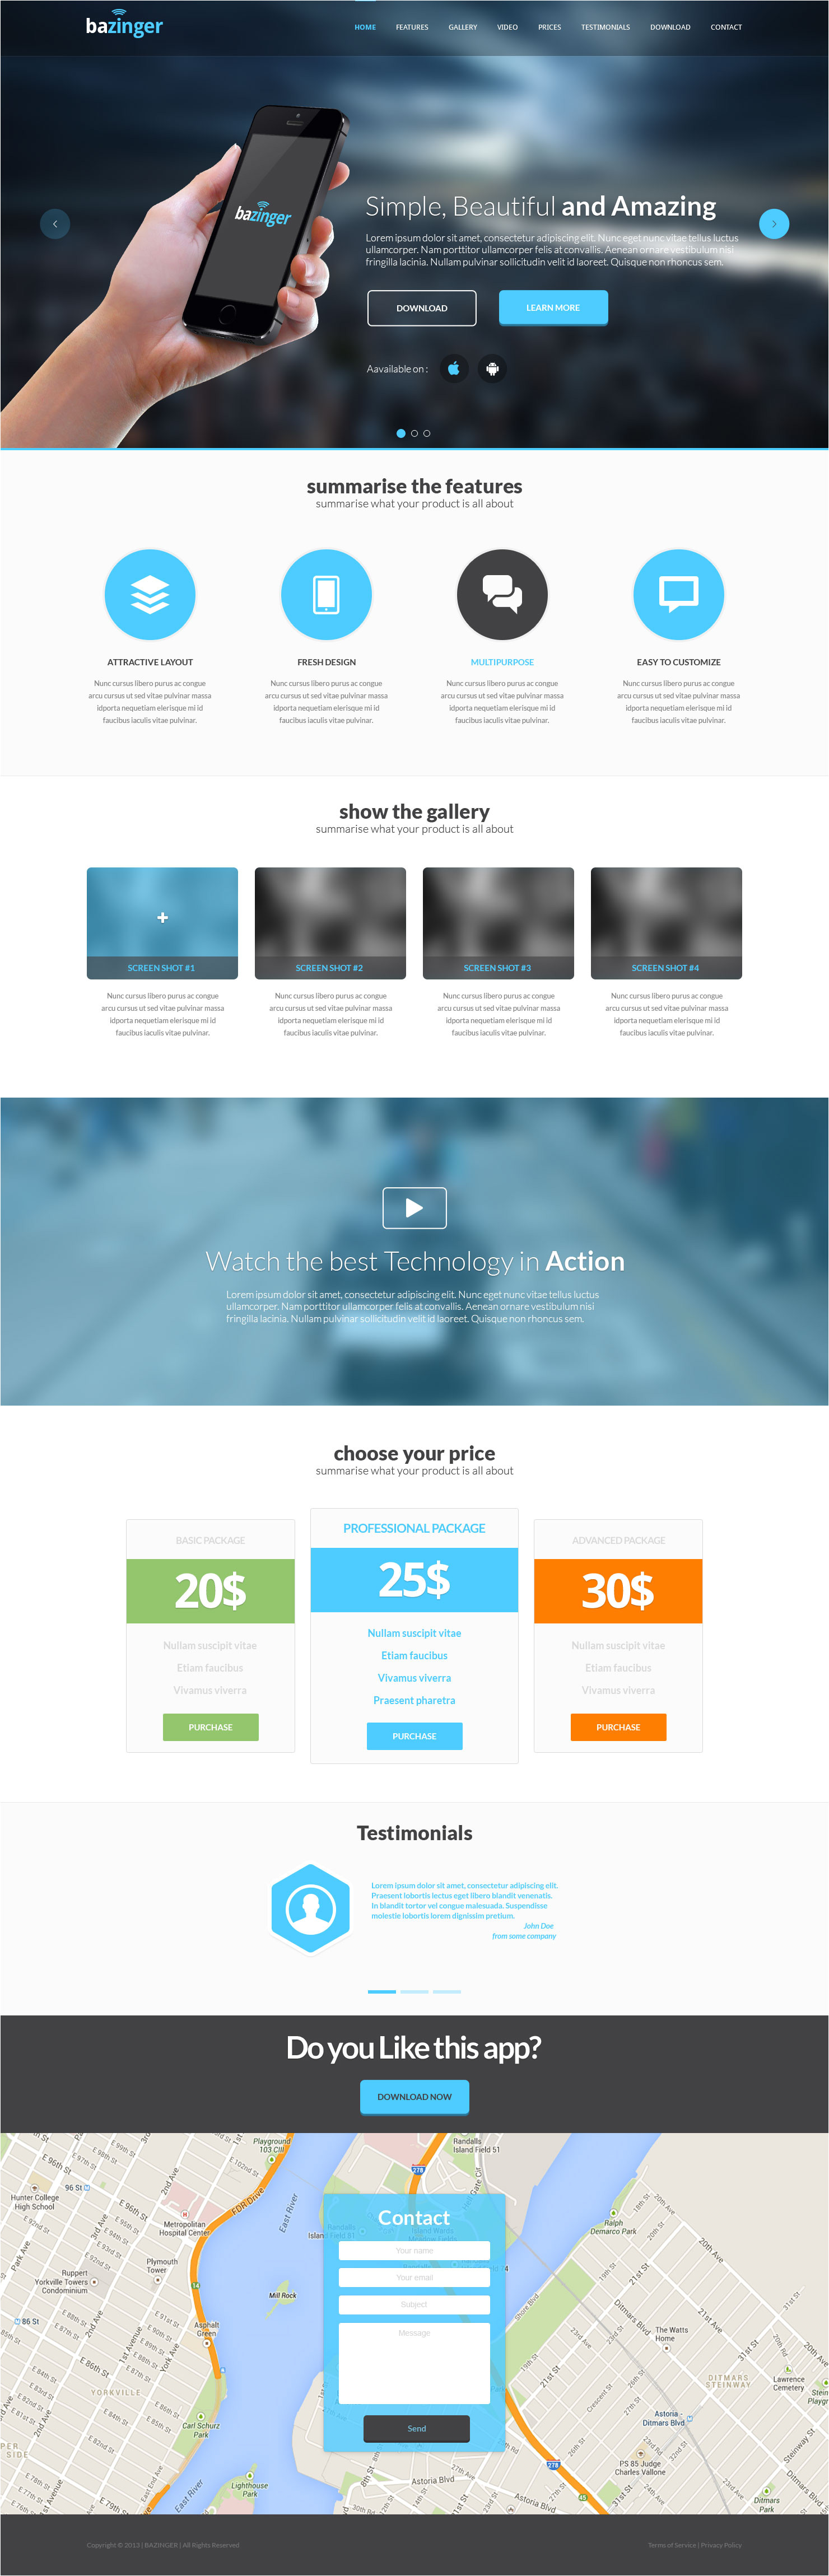 bazinger landing page free html template